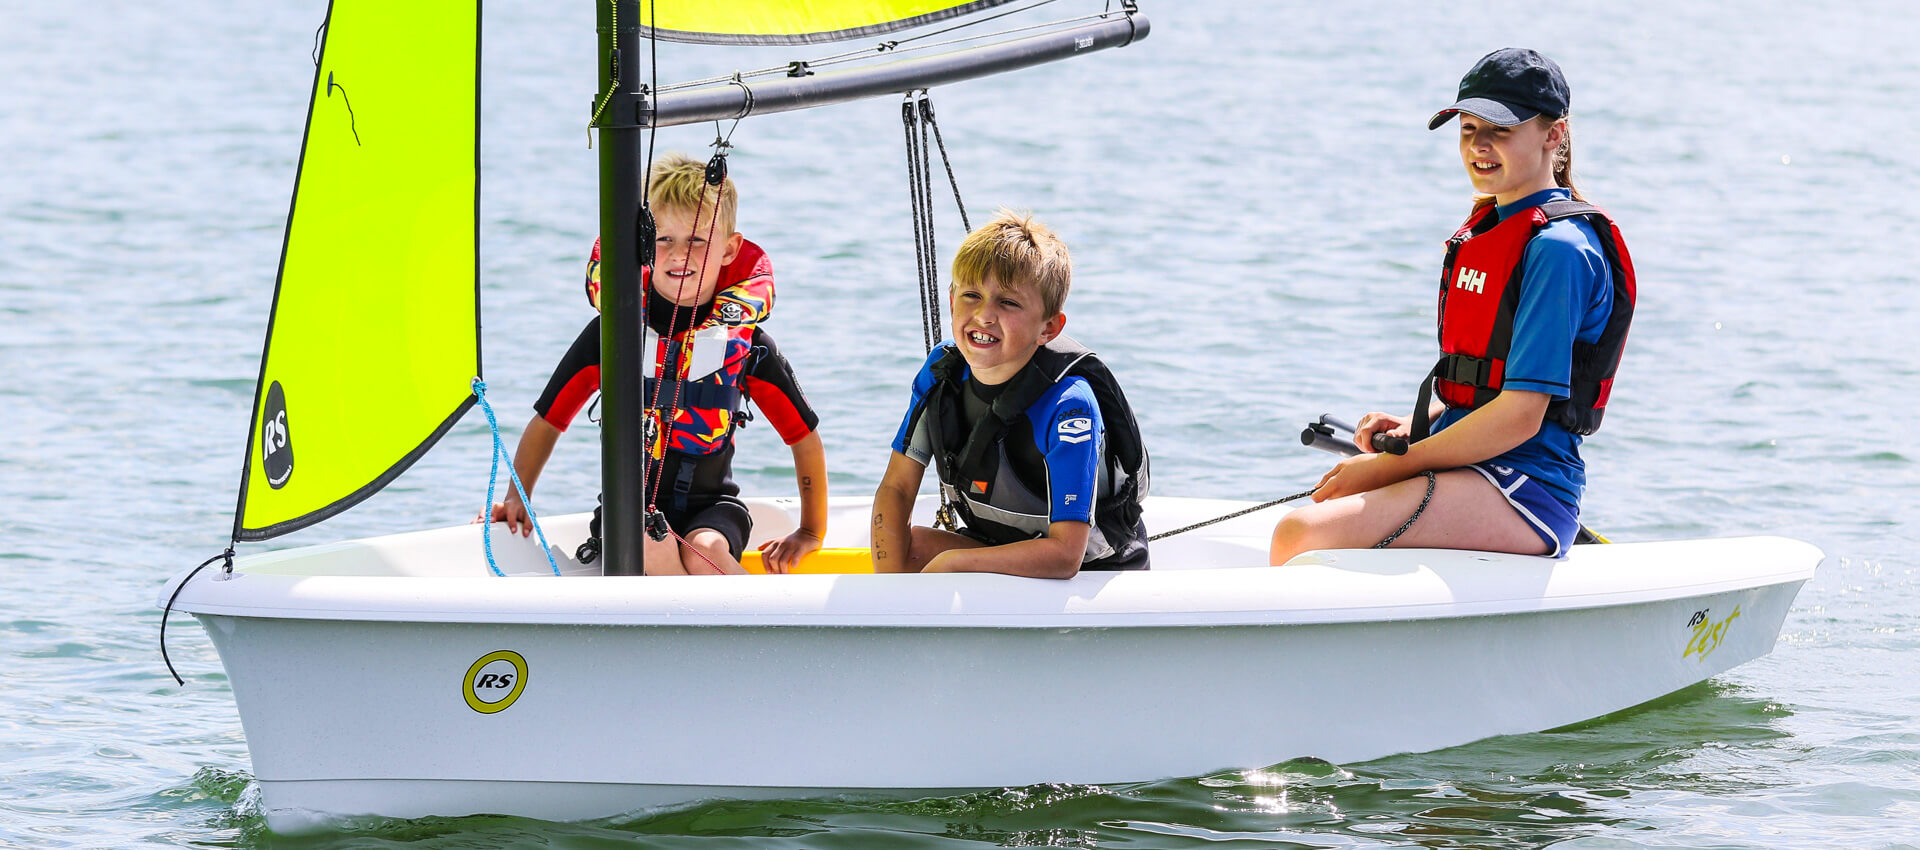 RS Zest – New generation compact sailboat with leading features for families and training centres